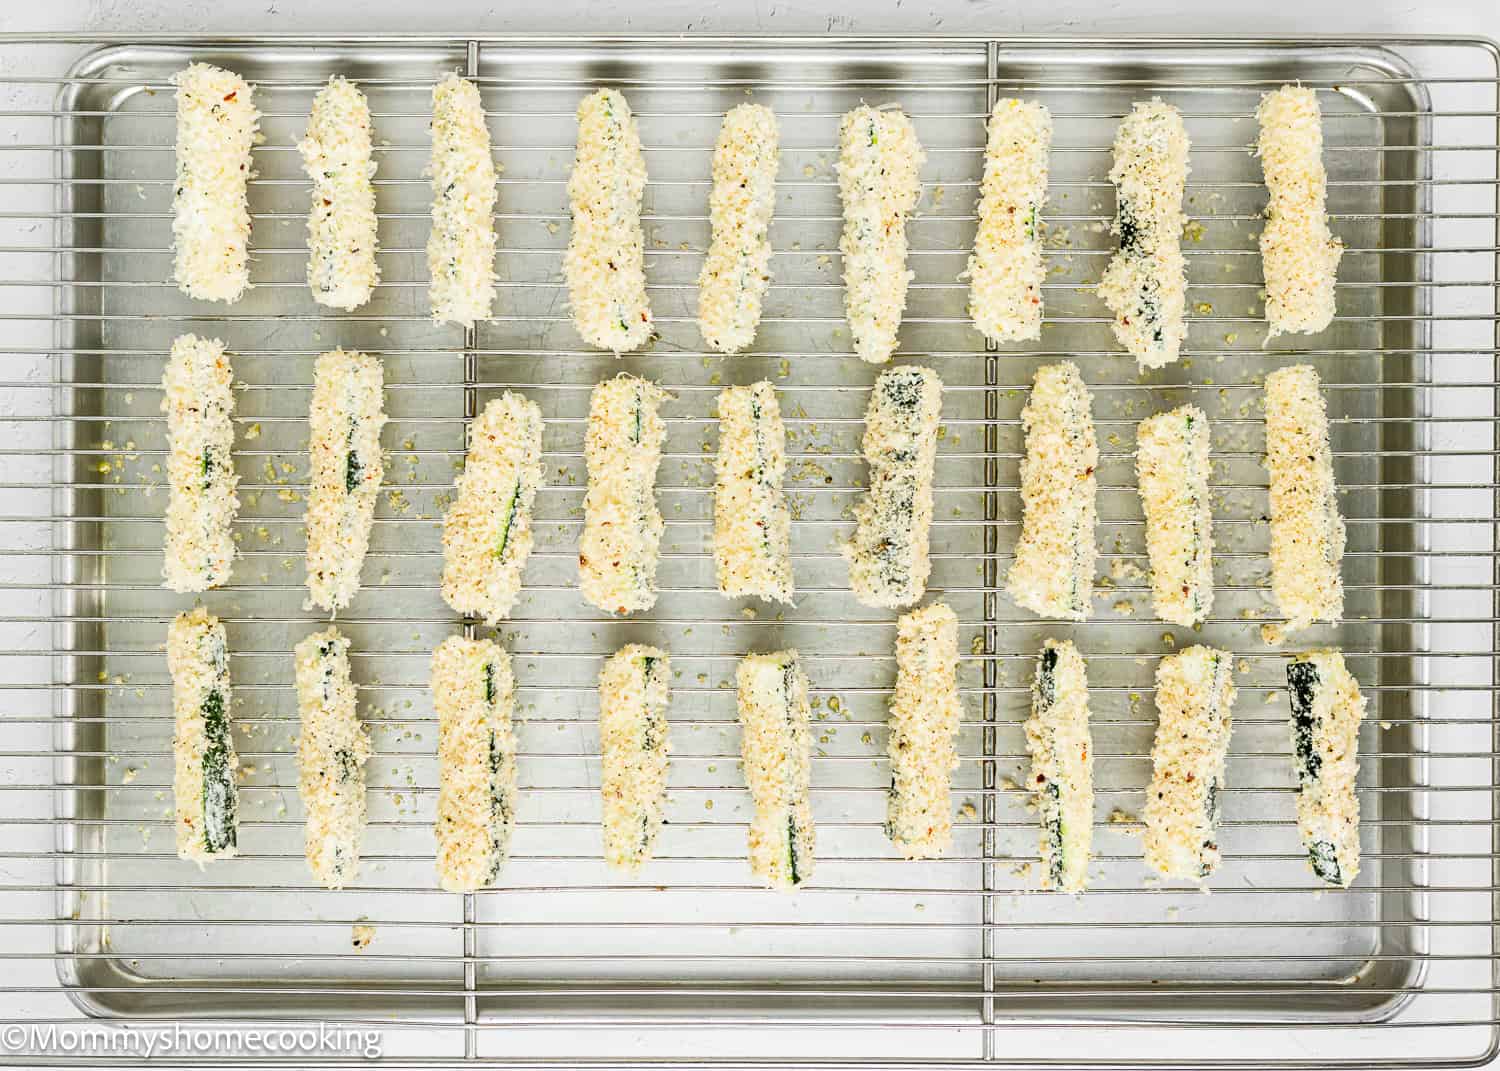 unbaked Eggless Zucchini Fries over a cooling rack on a baking sheet.